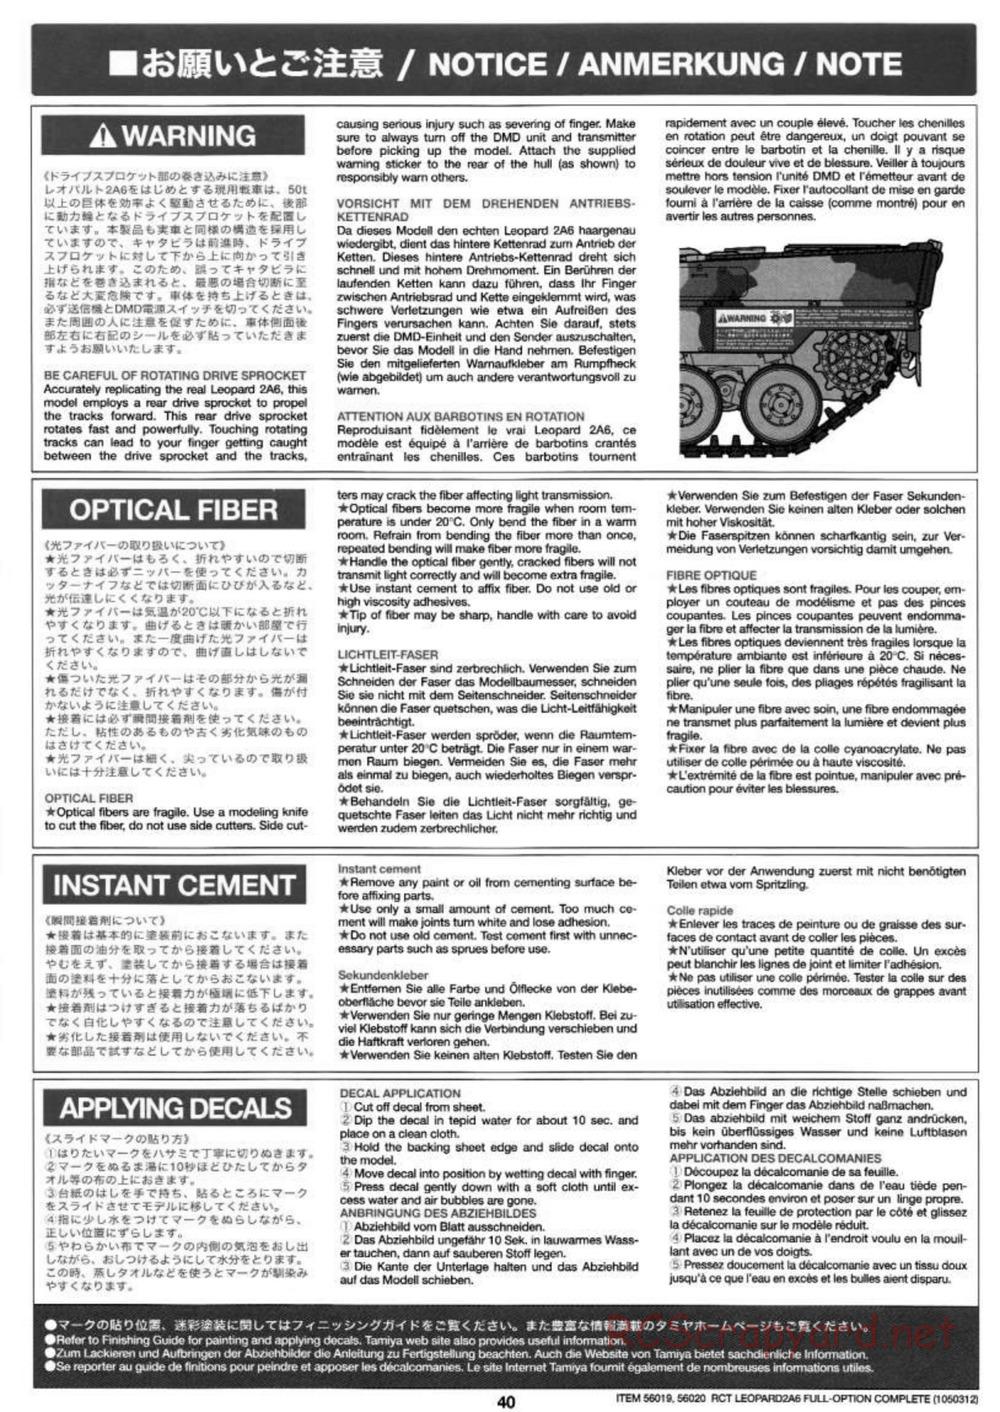 Tamiya - Leopard 2 A6 - 1/16 Scale Chassis - Manual - Page 40